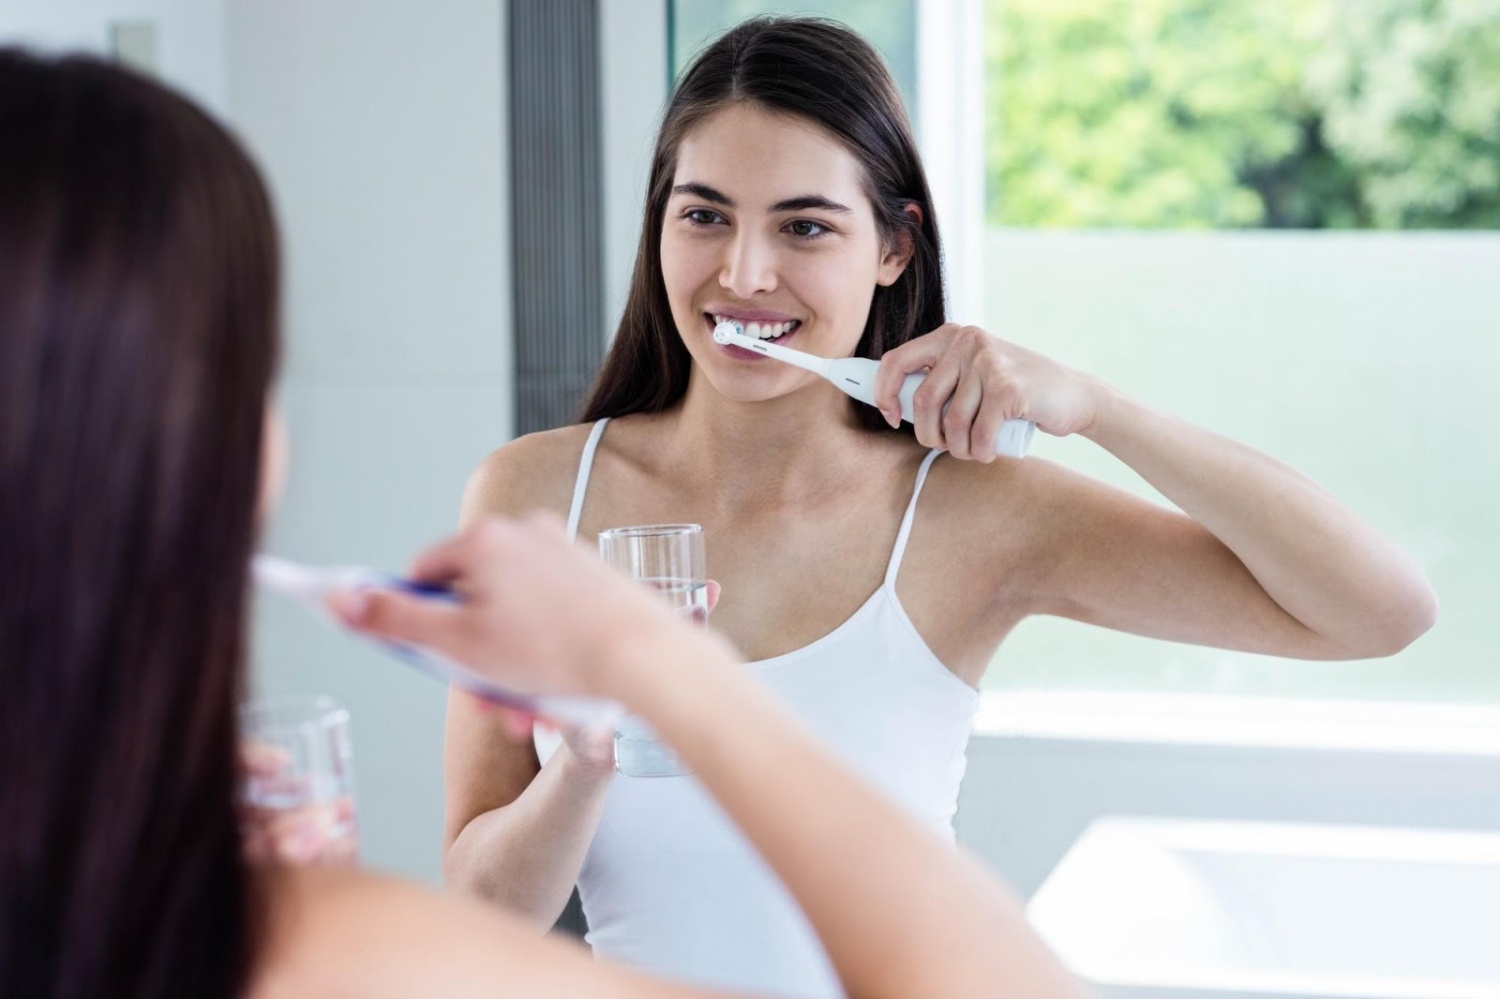 Stay Smiling: 5 Oral Hygiene Tips for Healthy Teeth and Gums